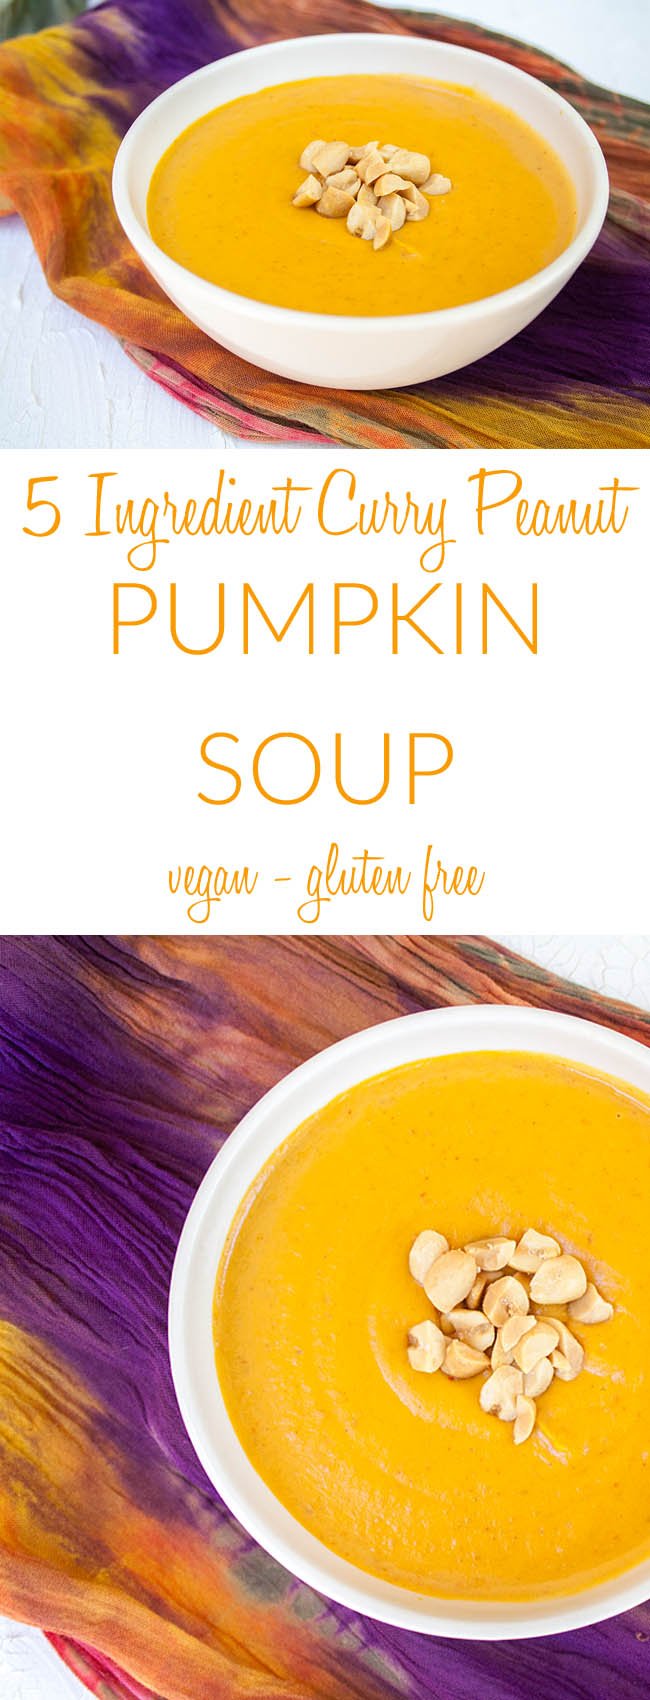 Pumpkin Peanut Butter Soup collage photo with text.